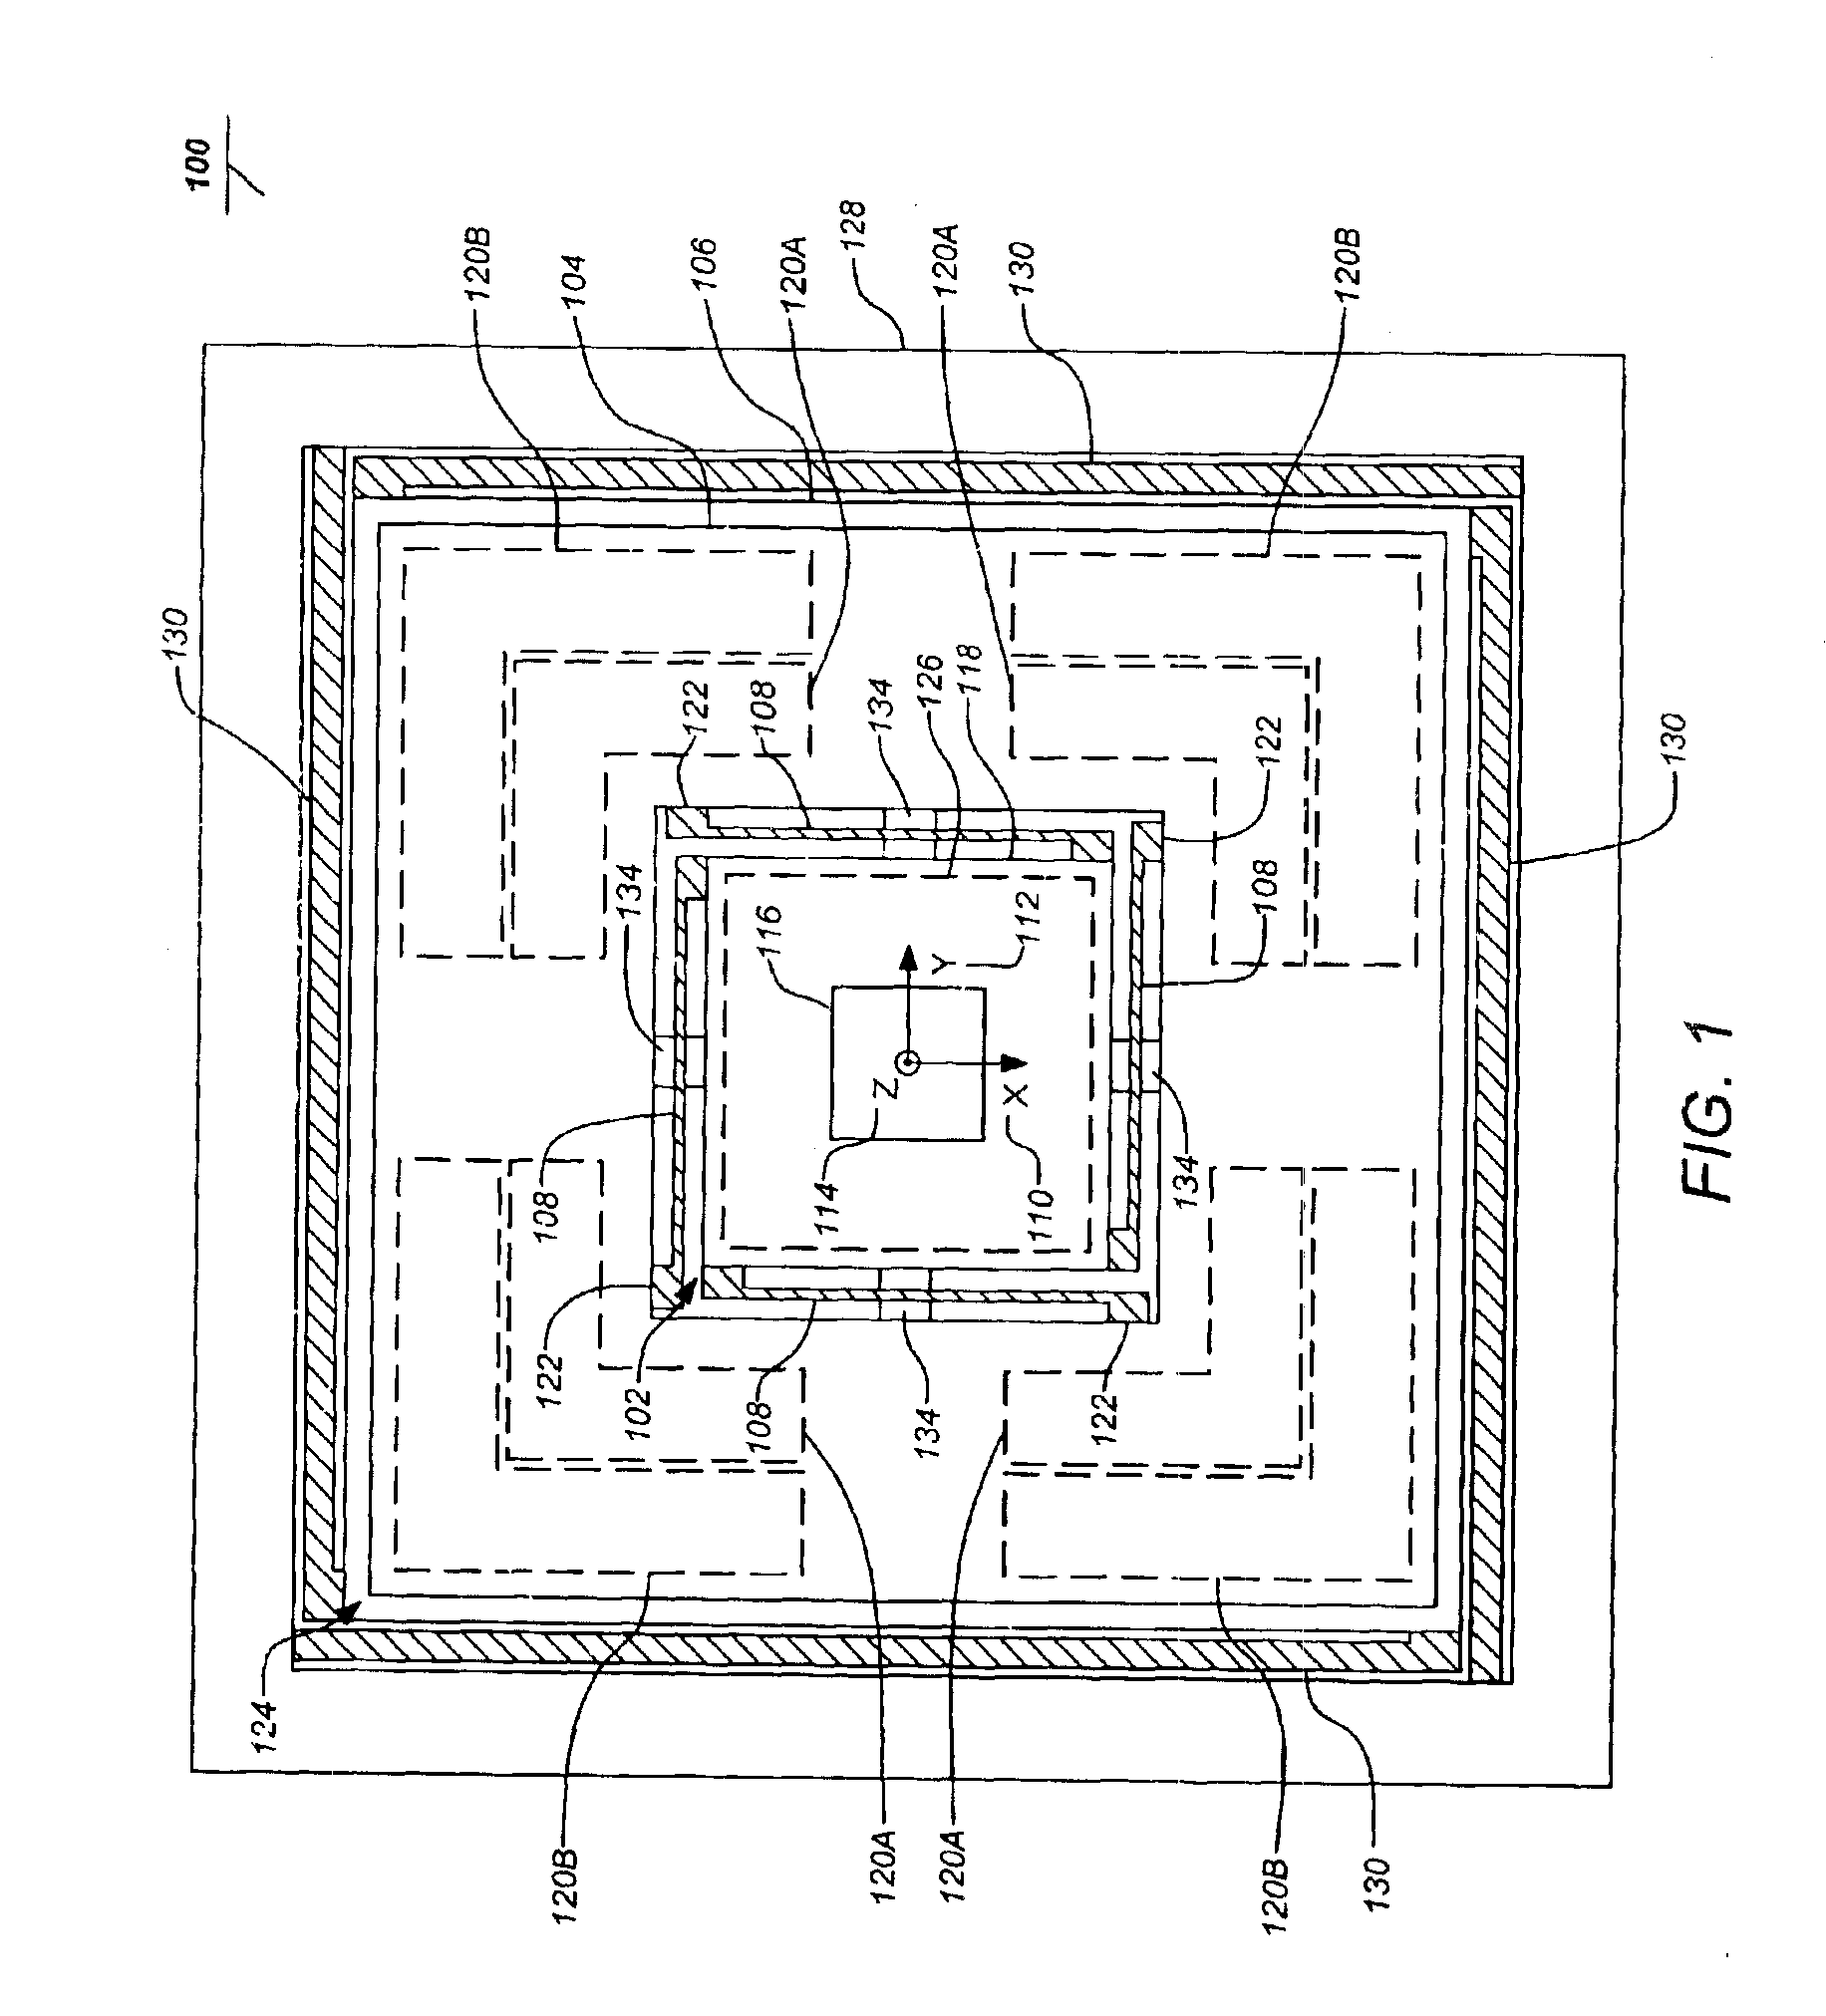 Isolated resonator gyroscope with isolation trimming using a secondary element